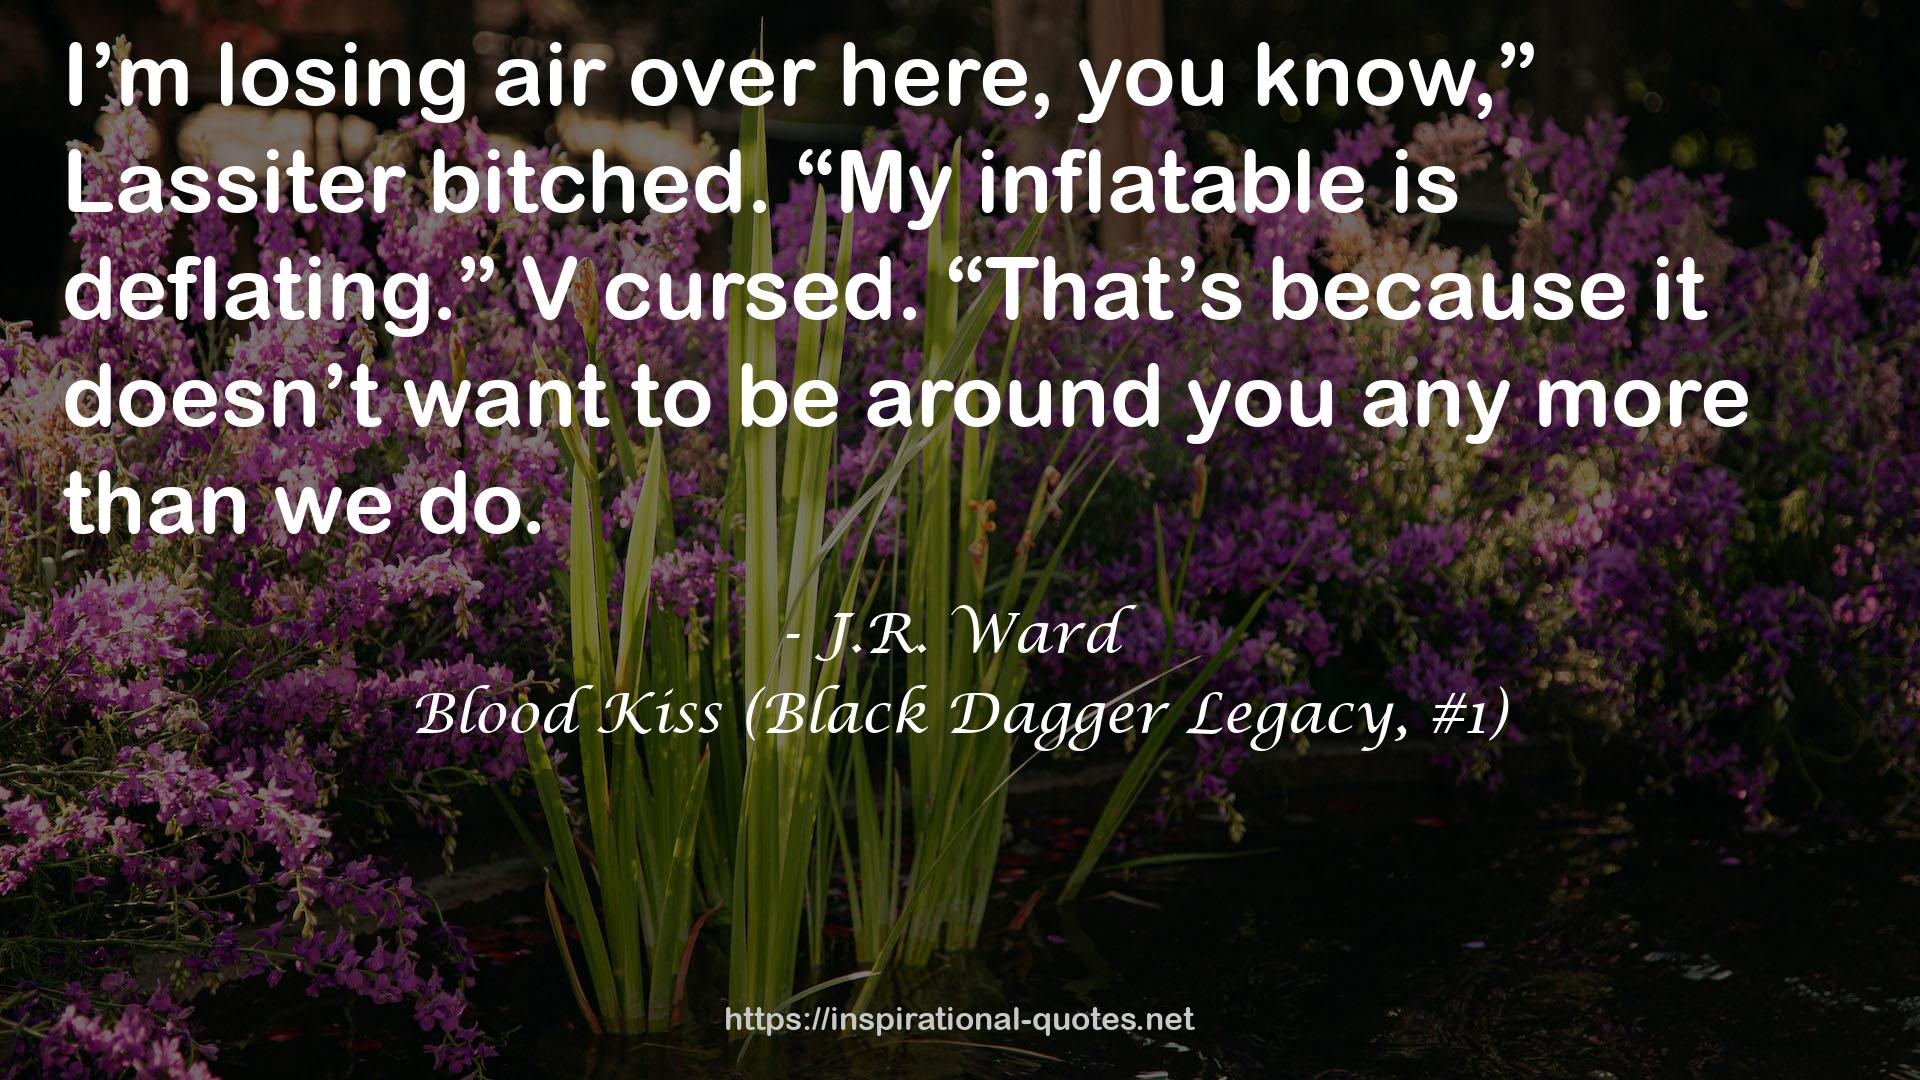 Blood Kiss (Black Dagger Legacy, #1) QUOTES